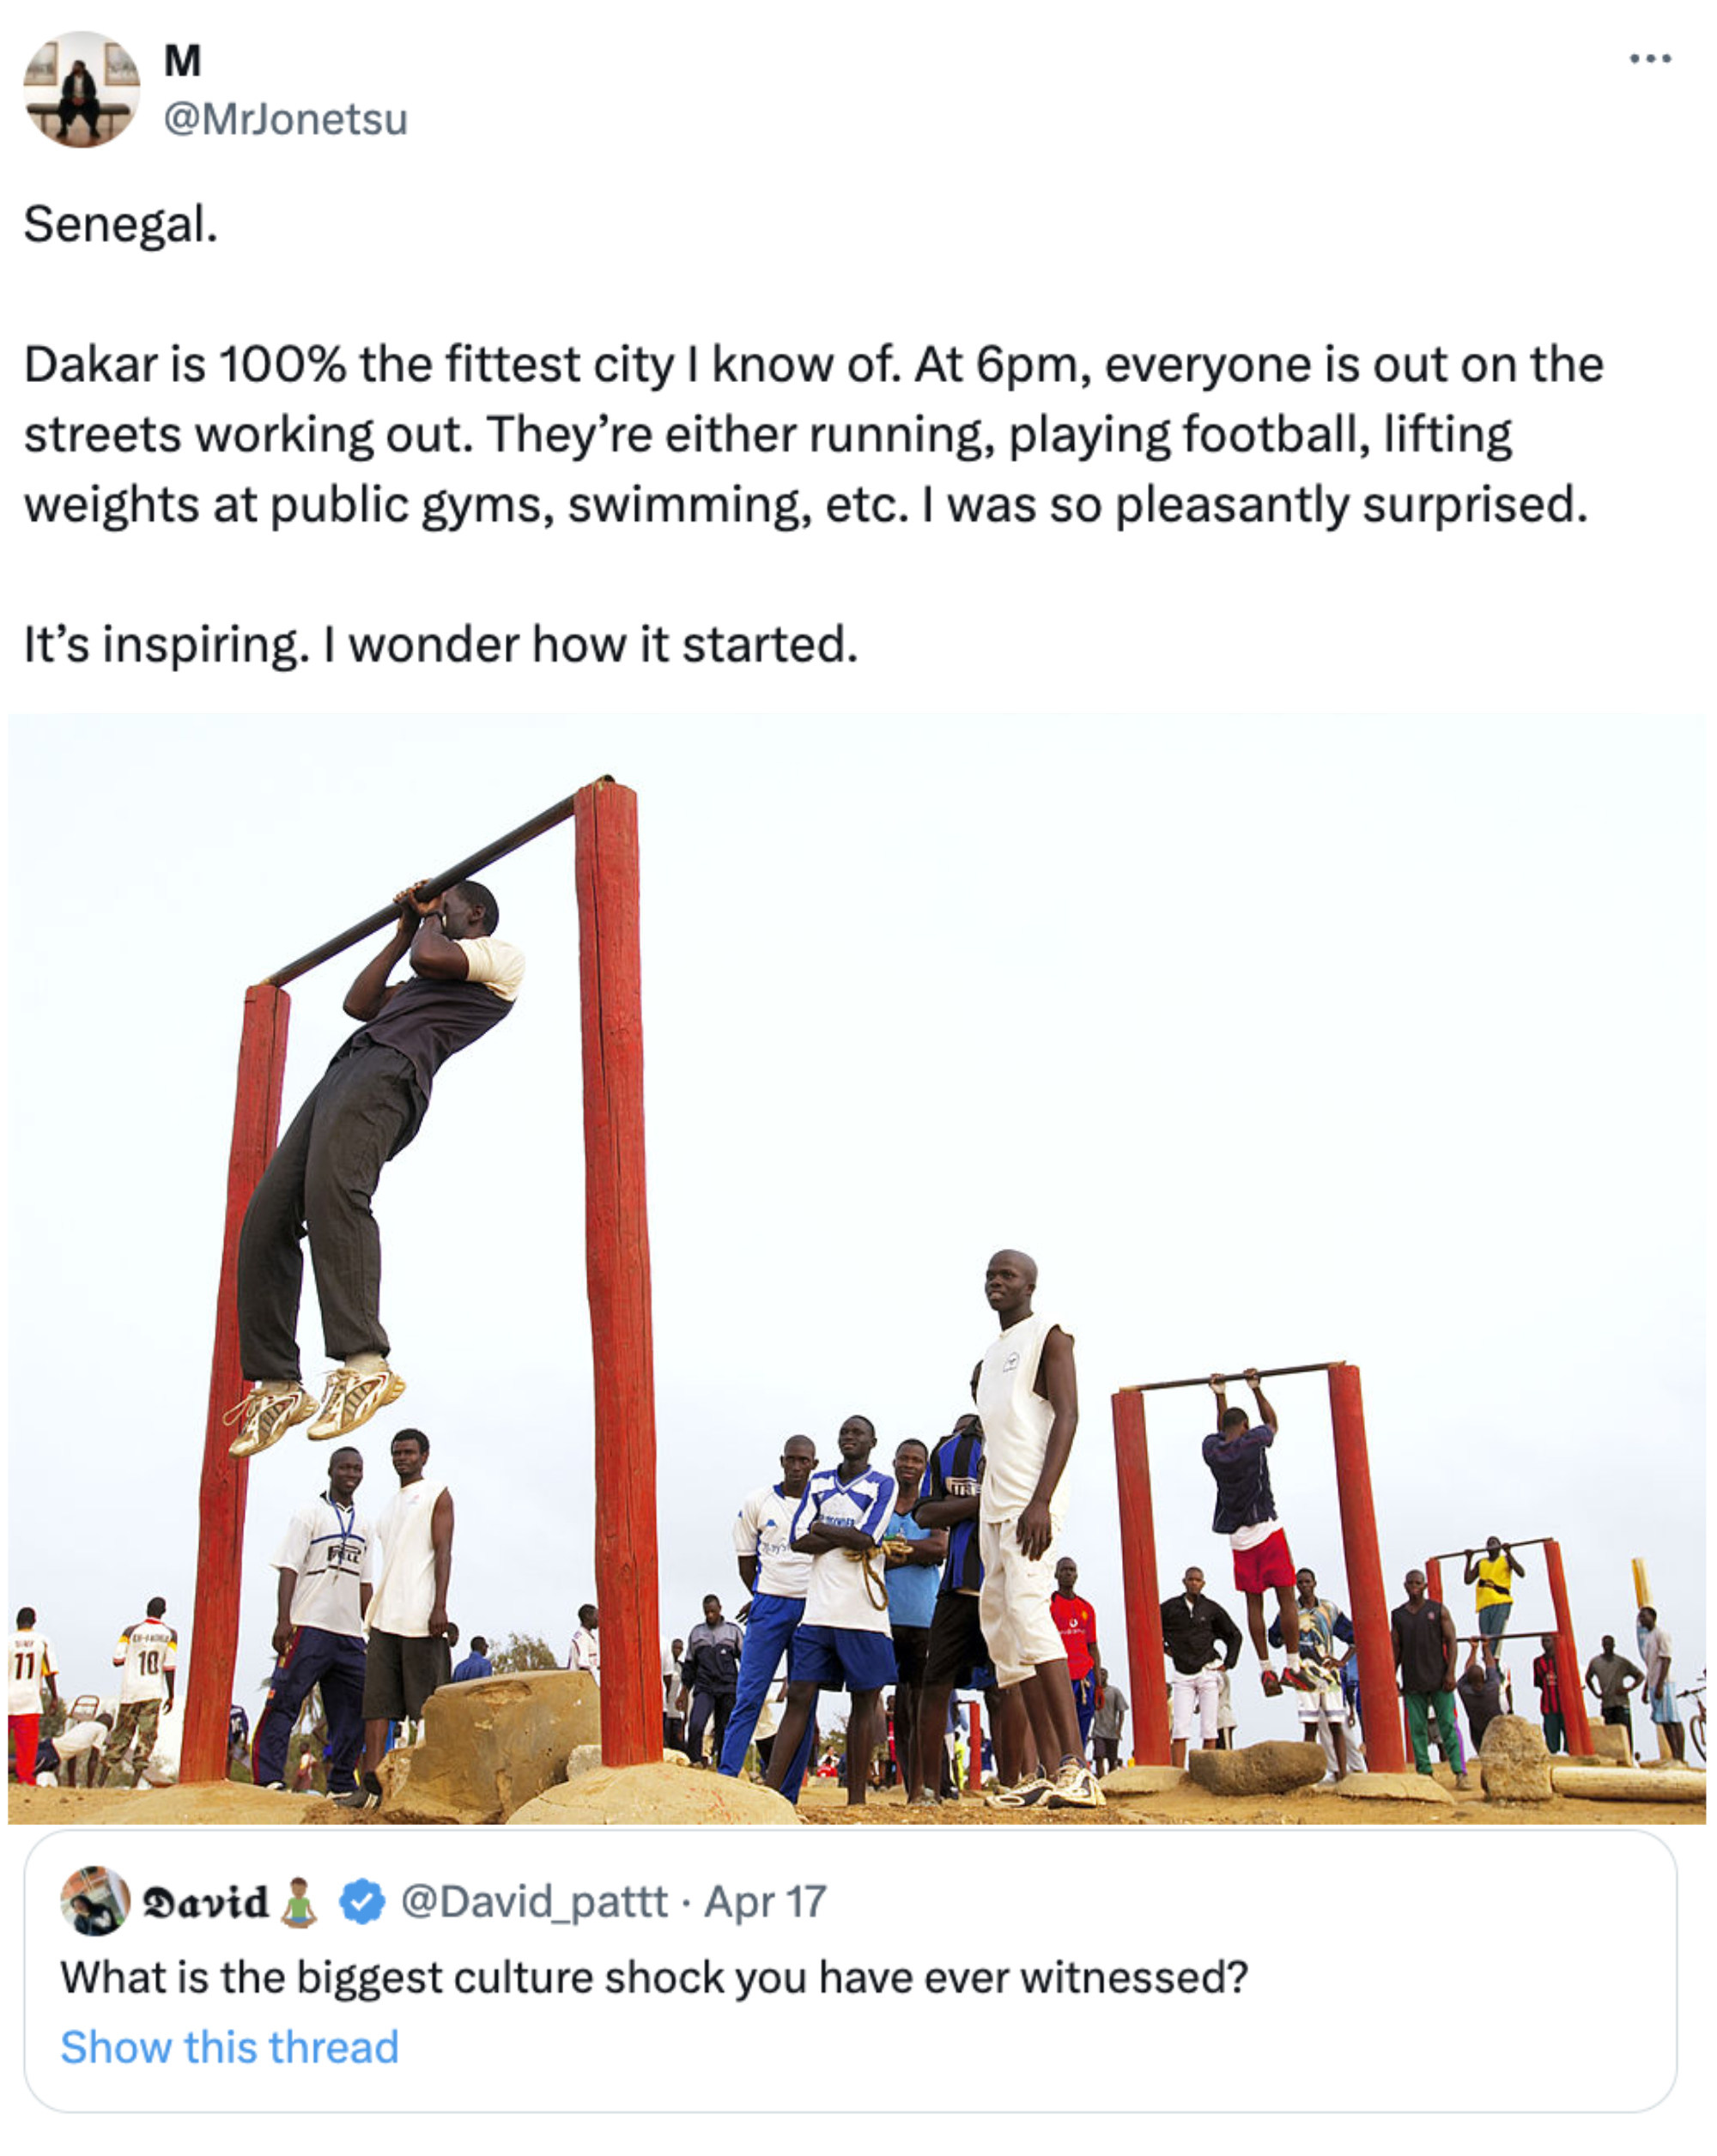 Outdoor public gym with numerous people exercising, lifting weights and running in Dakar. A monument is visible in the background